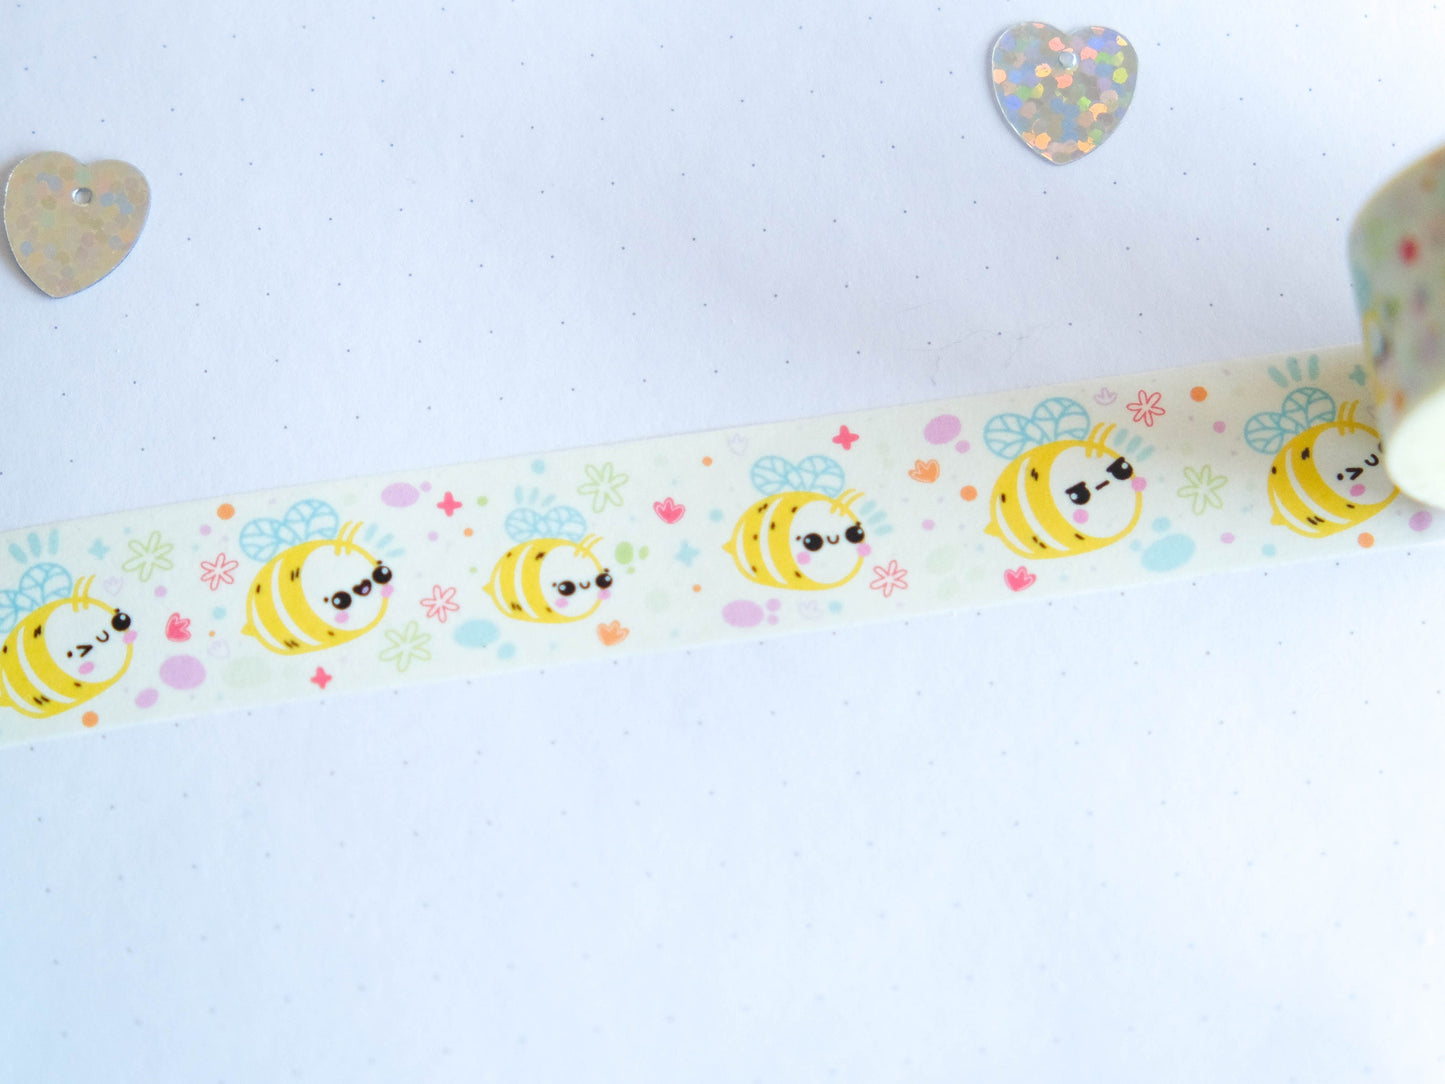 Washi tape kawaii yellow bees perfect for Spring 15mm x 10m - Masking tape bumblebees perfect to decorate bullet journal